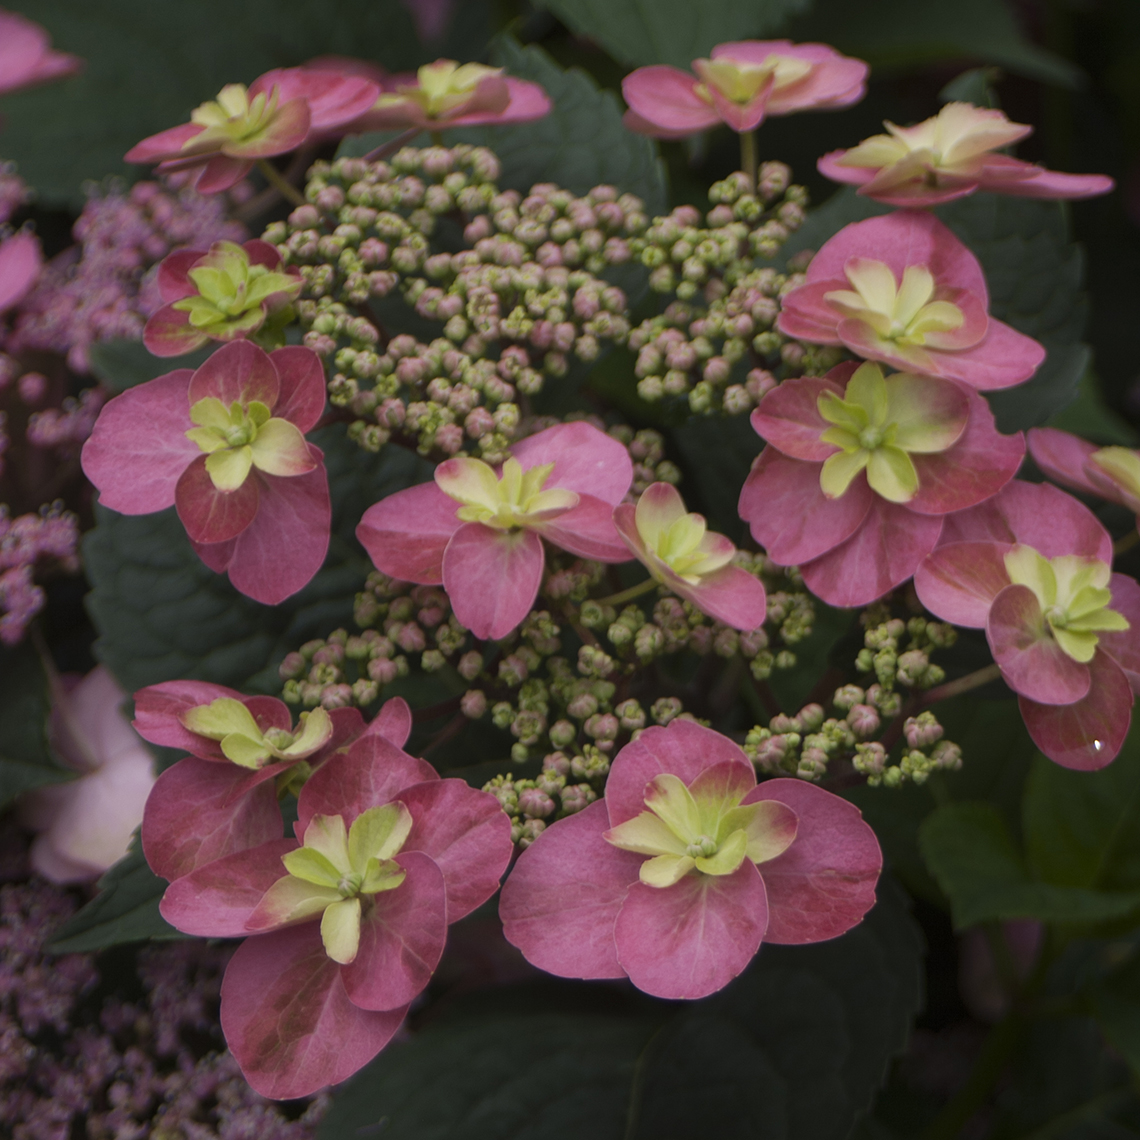 Closeup of the lacecap bloom of Tuff Stuff Red mountain hydrangea showing the yellow eyes in the center of each floret